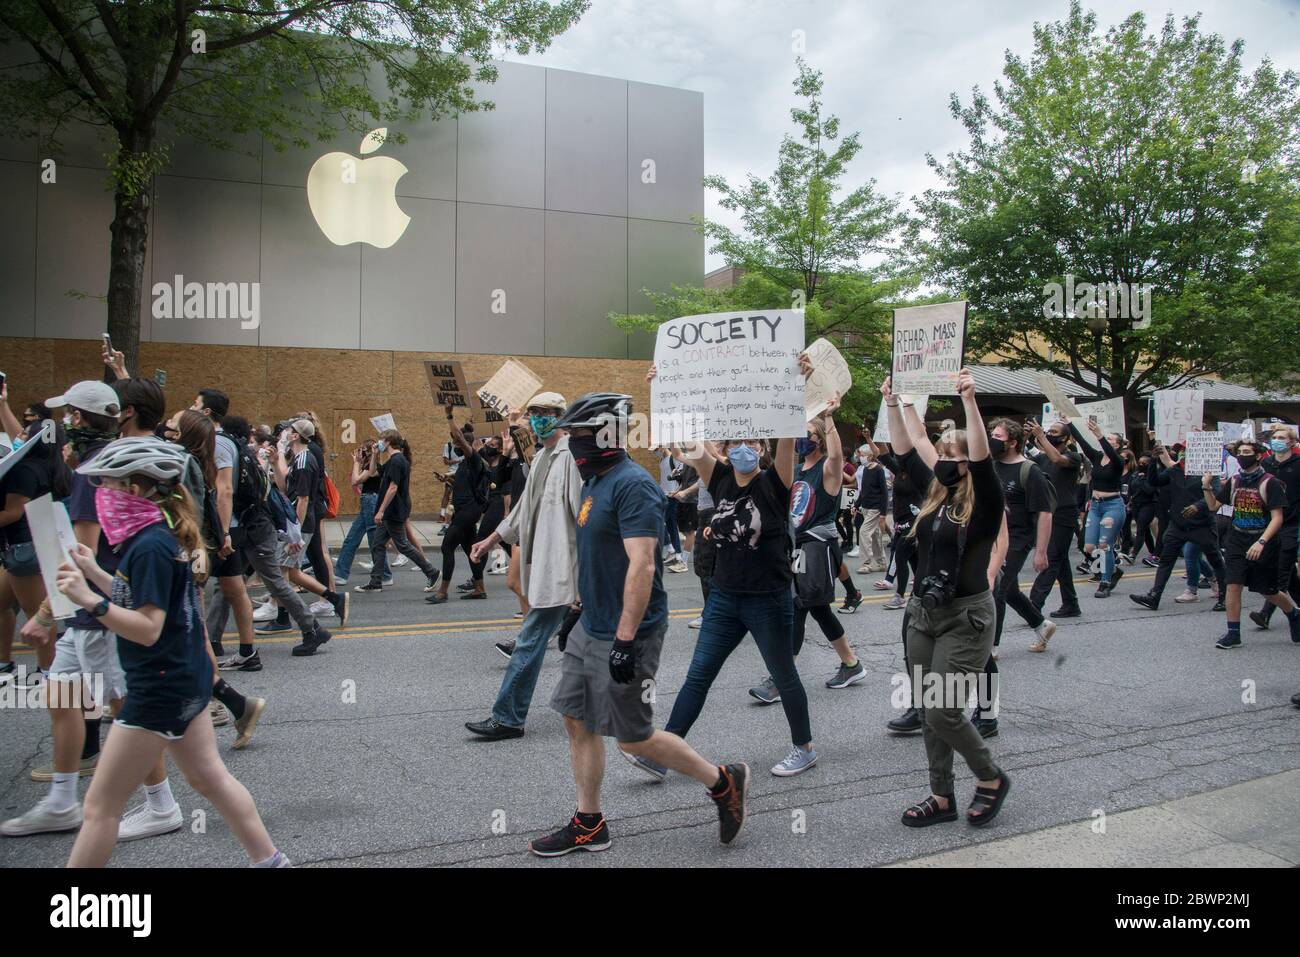 Bethesda,MD, June 2, 2020,USA: Businesses in Bethesda are boarded up in case of looting. A rally organized by high school students brought thousands o Stock Photo